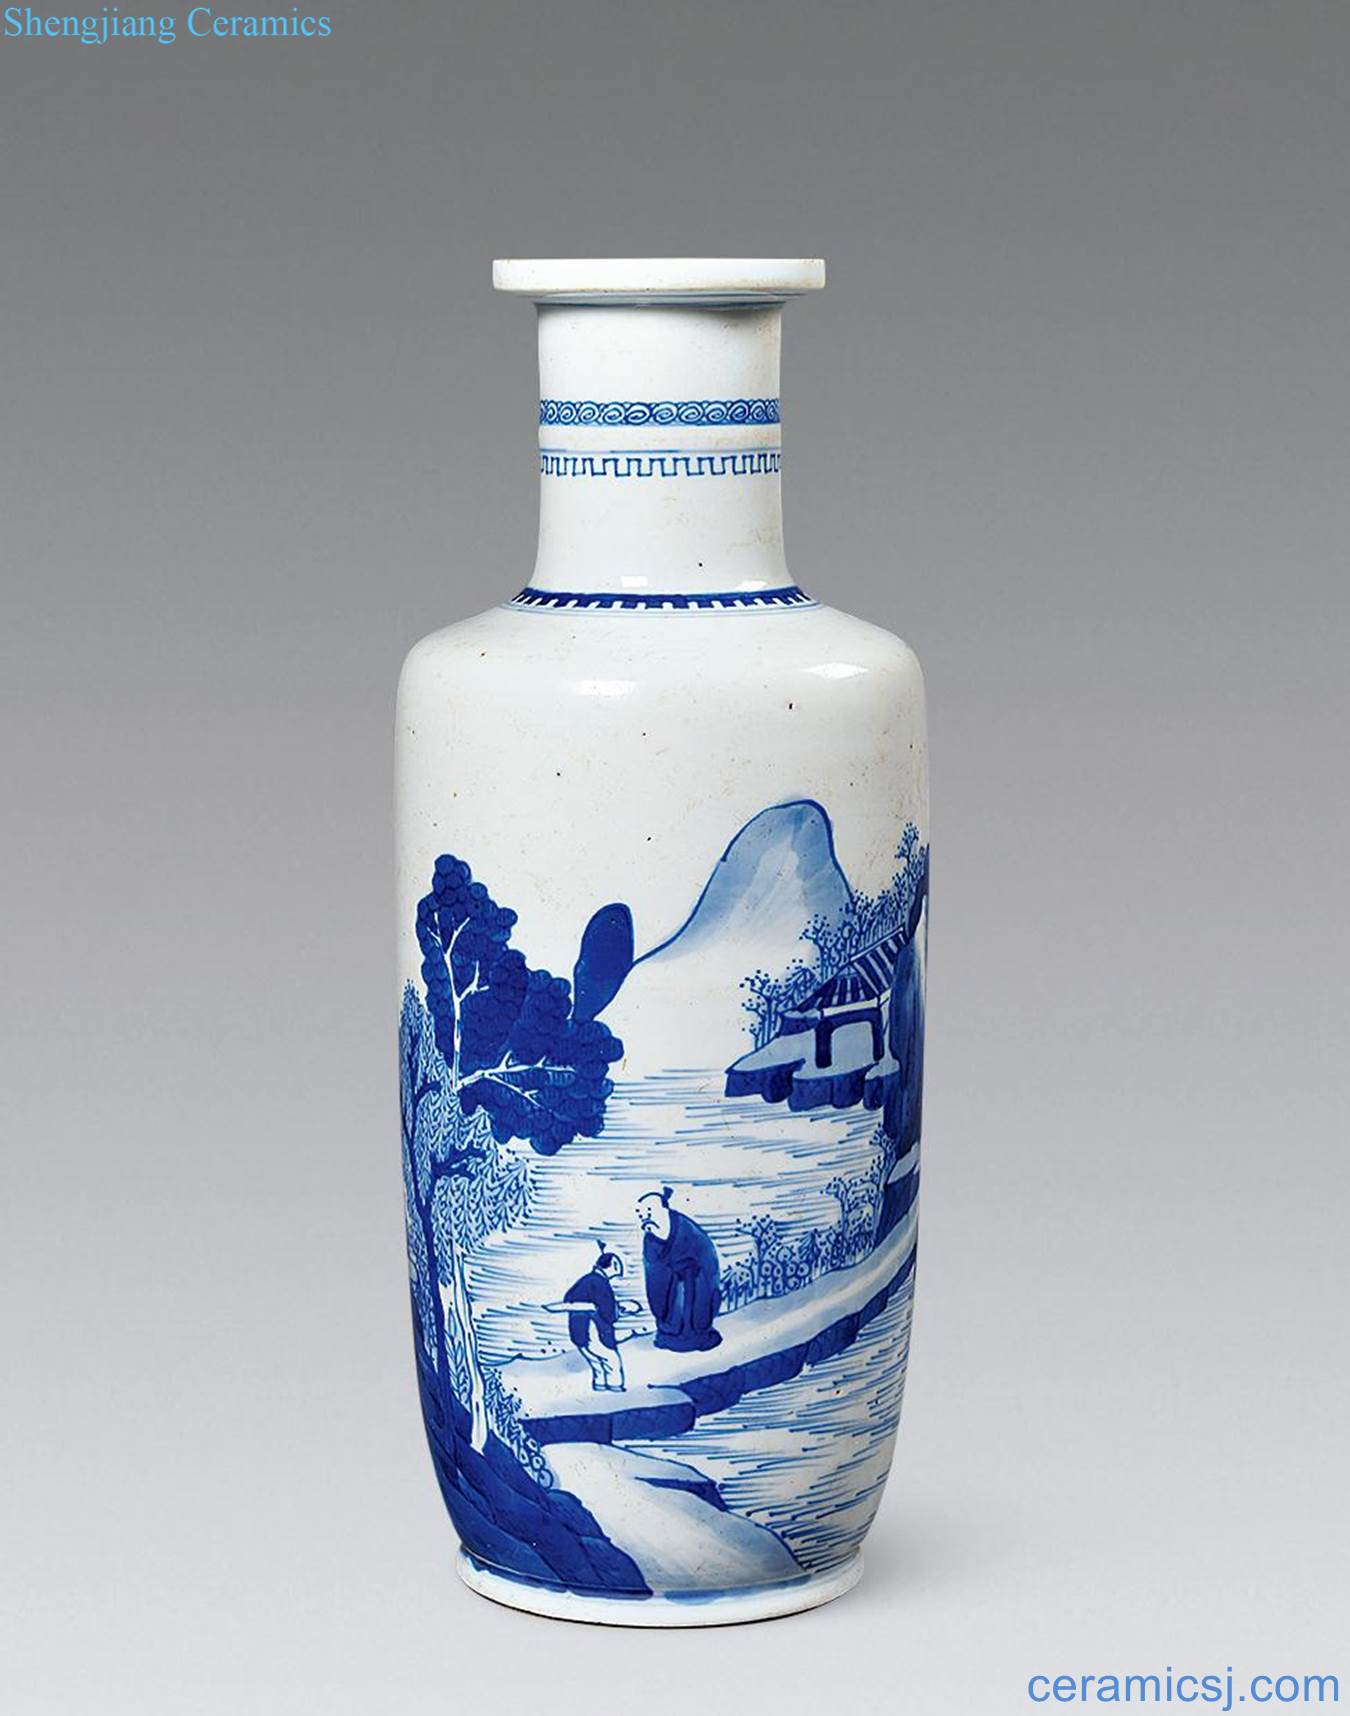 The qing emperor kangxi Blue and white landscape characters were bottles